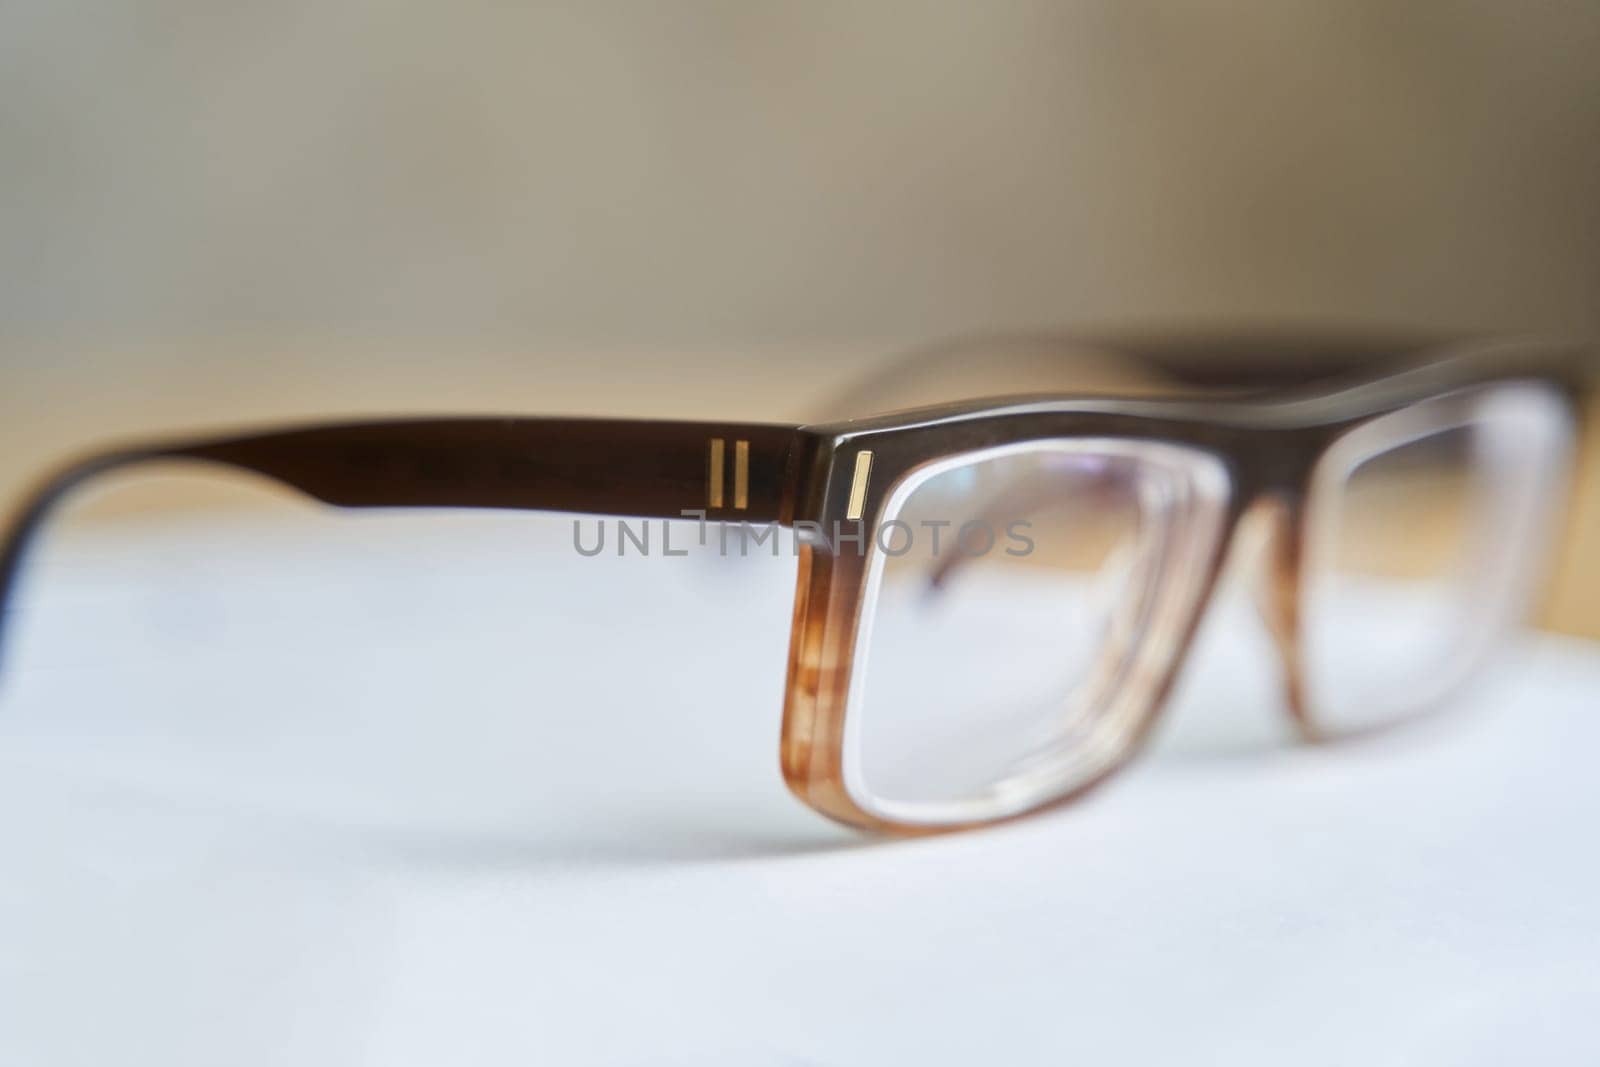 Fashionable brown eyeglass frame. Glasses for myopia. Close-up